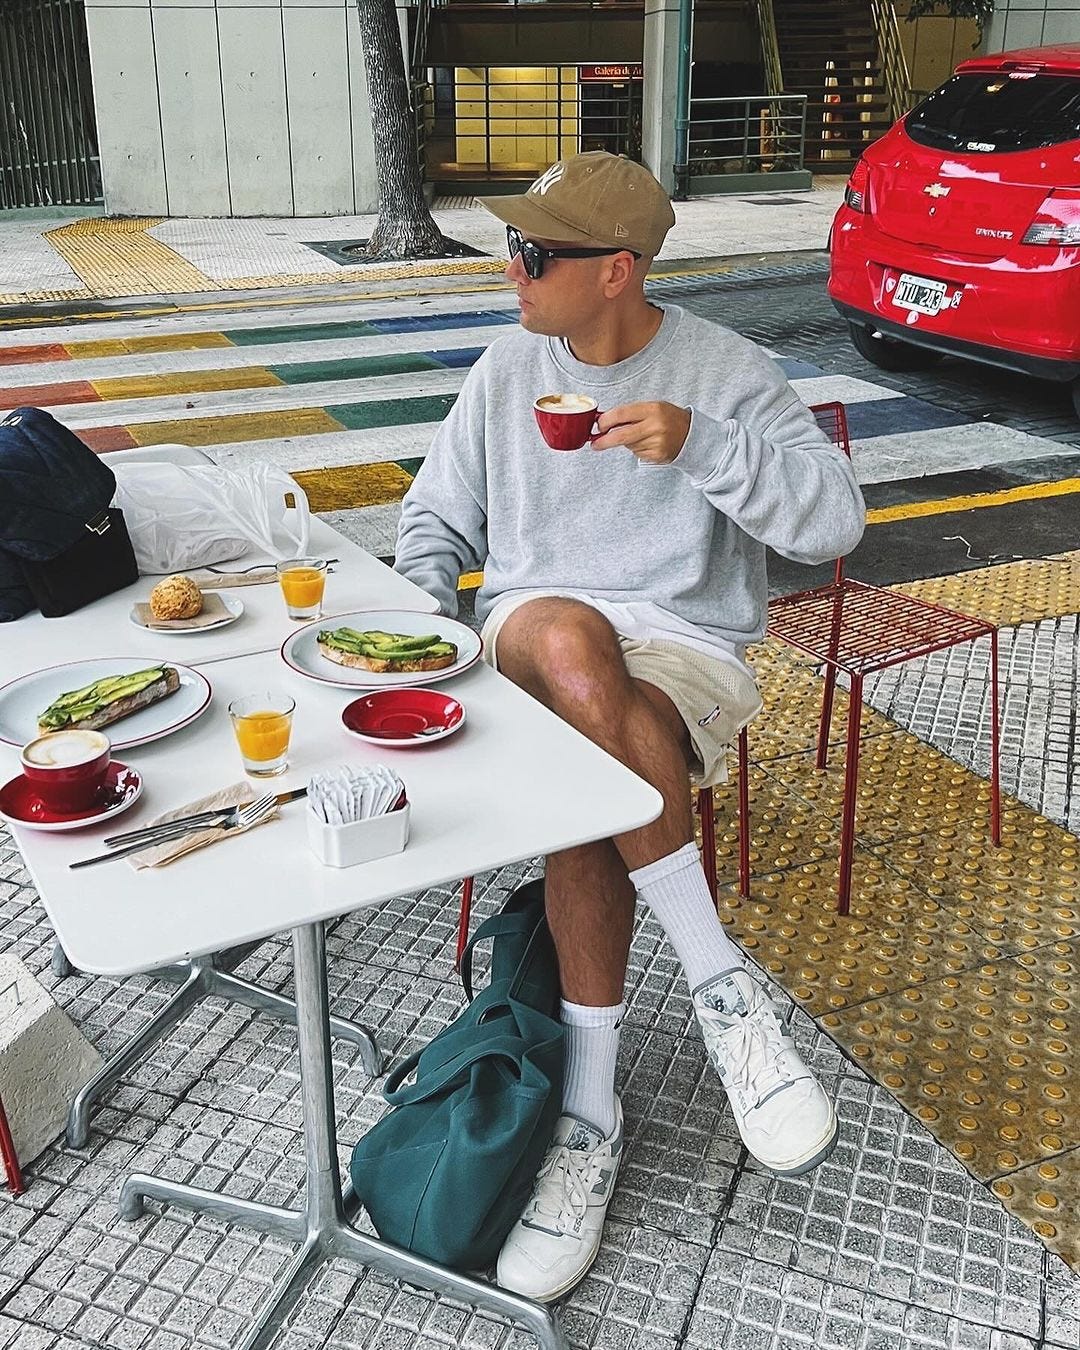 man sitting at an outdoor cafe drinking a coffee and wearing a grey sweatshirt, shorts, and white sneakers with tall socks